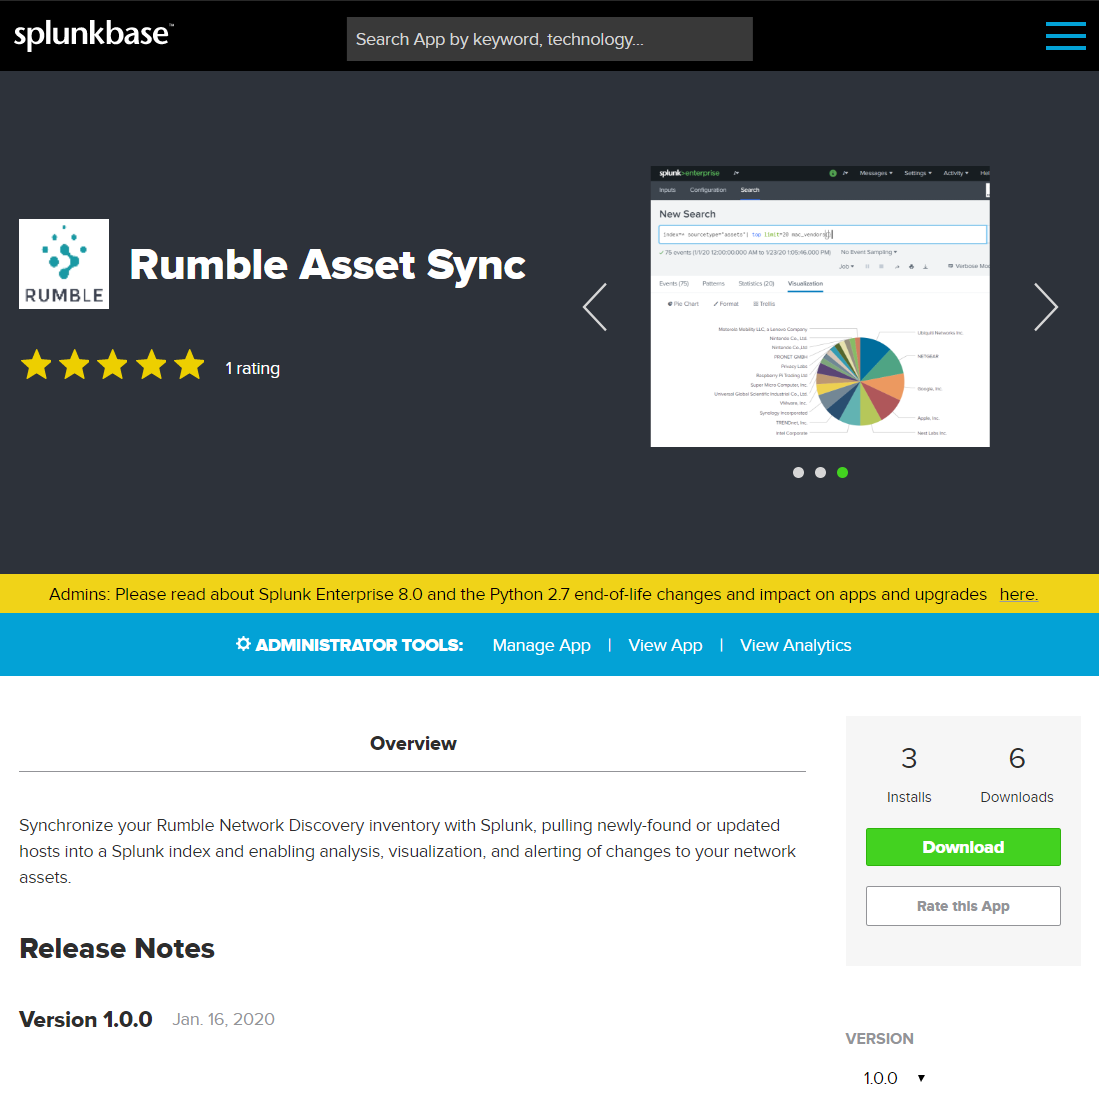 Syncing Rumble Assets with Splunk